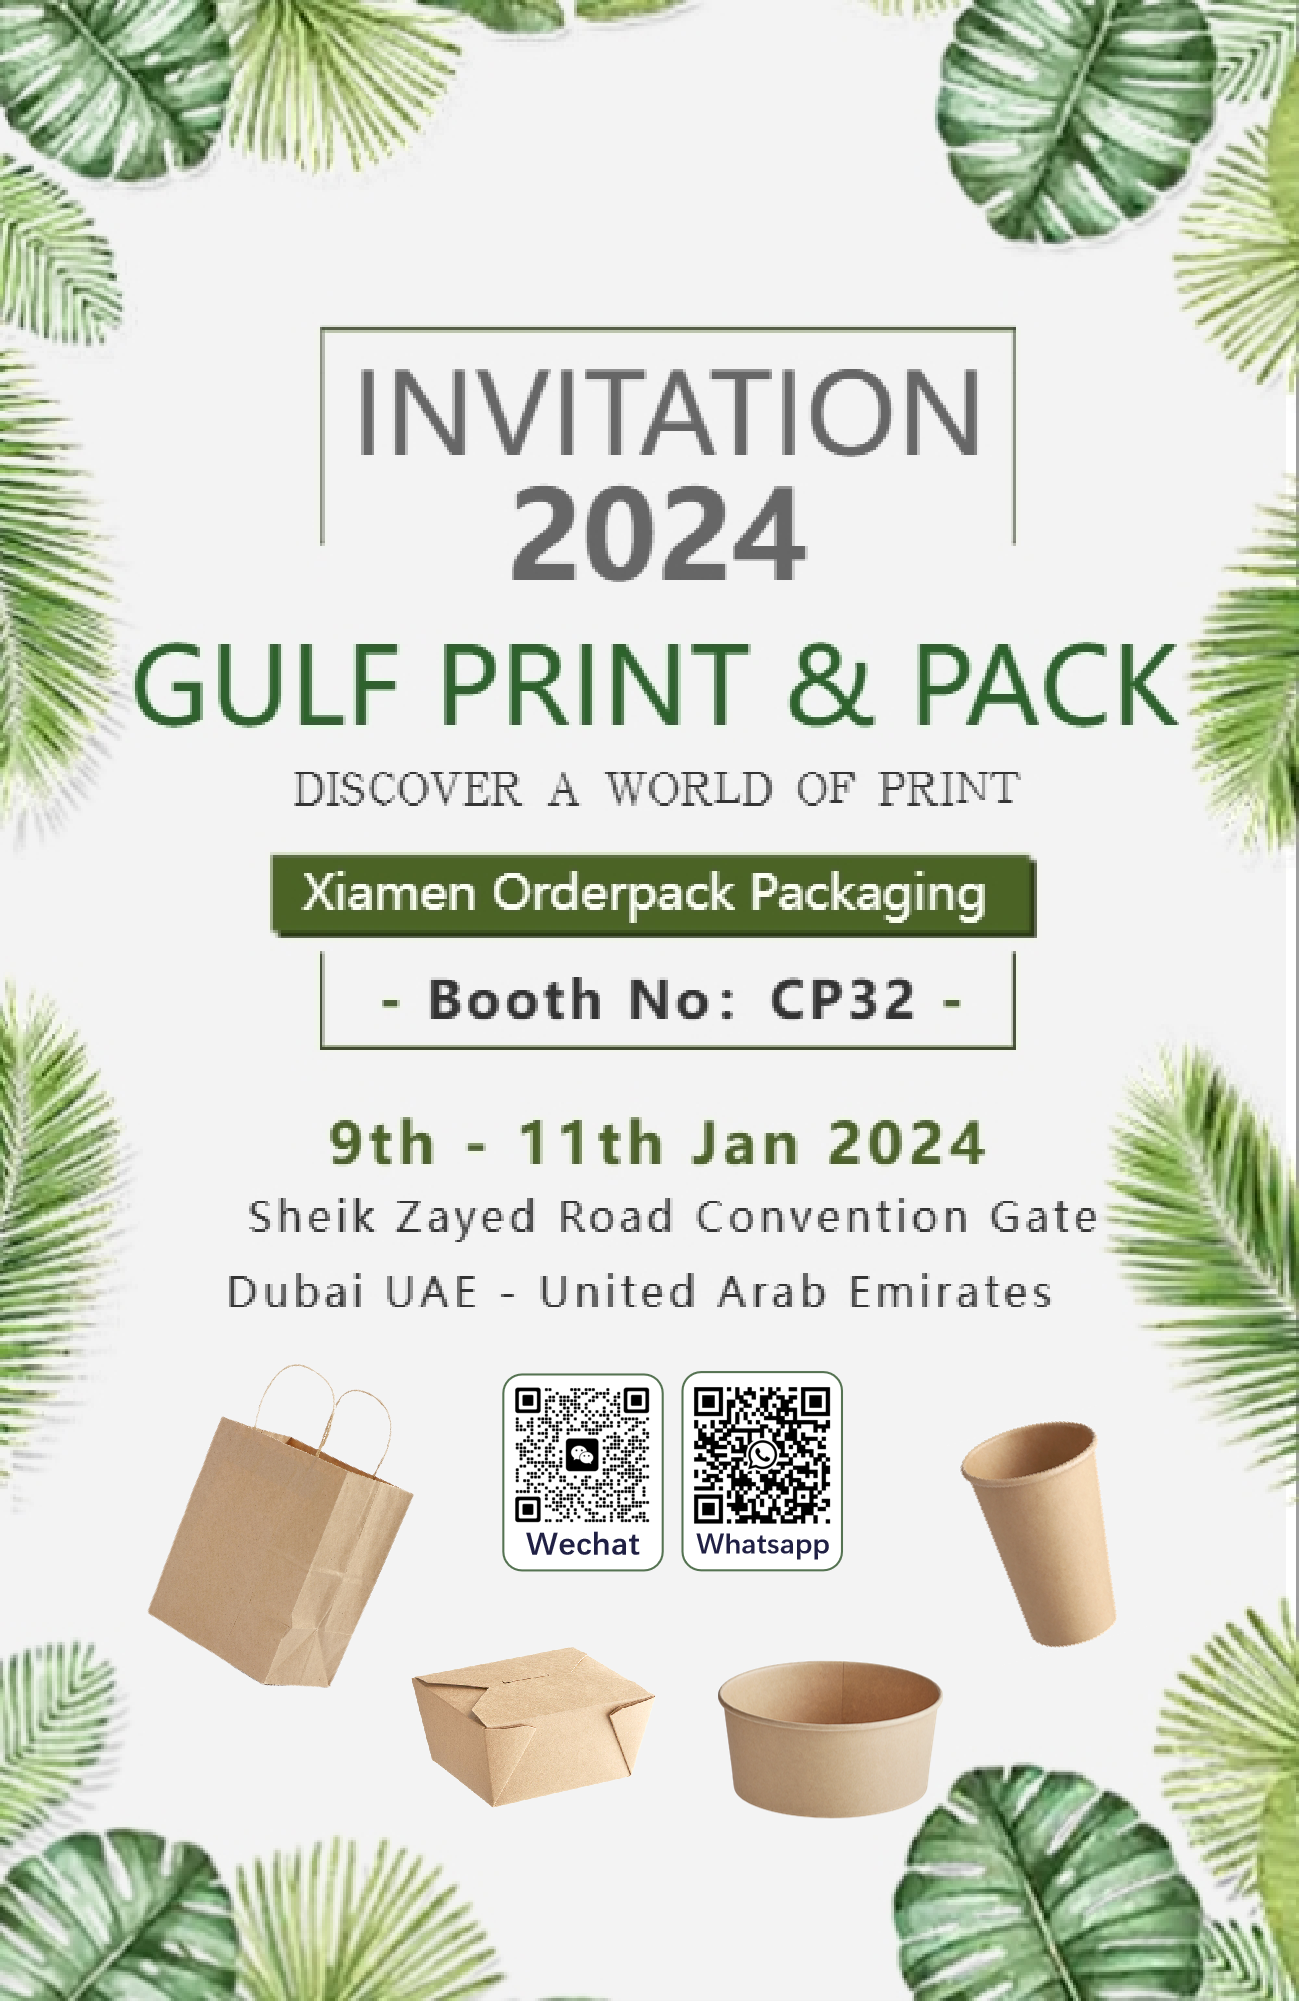 food packaging trade show